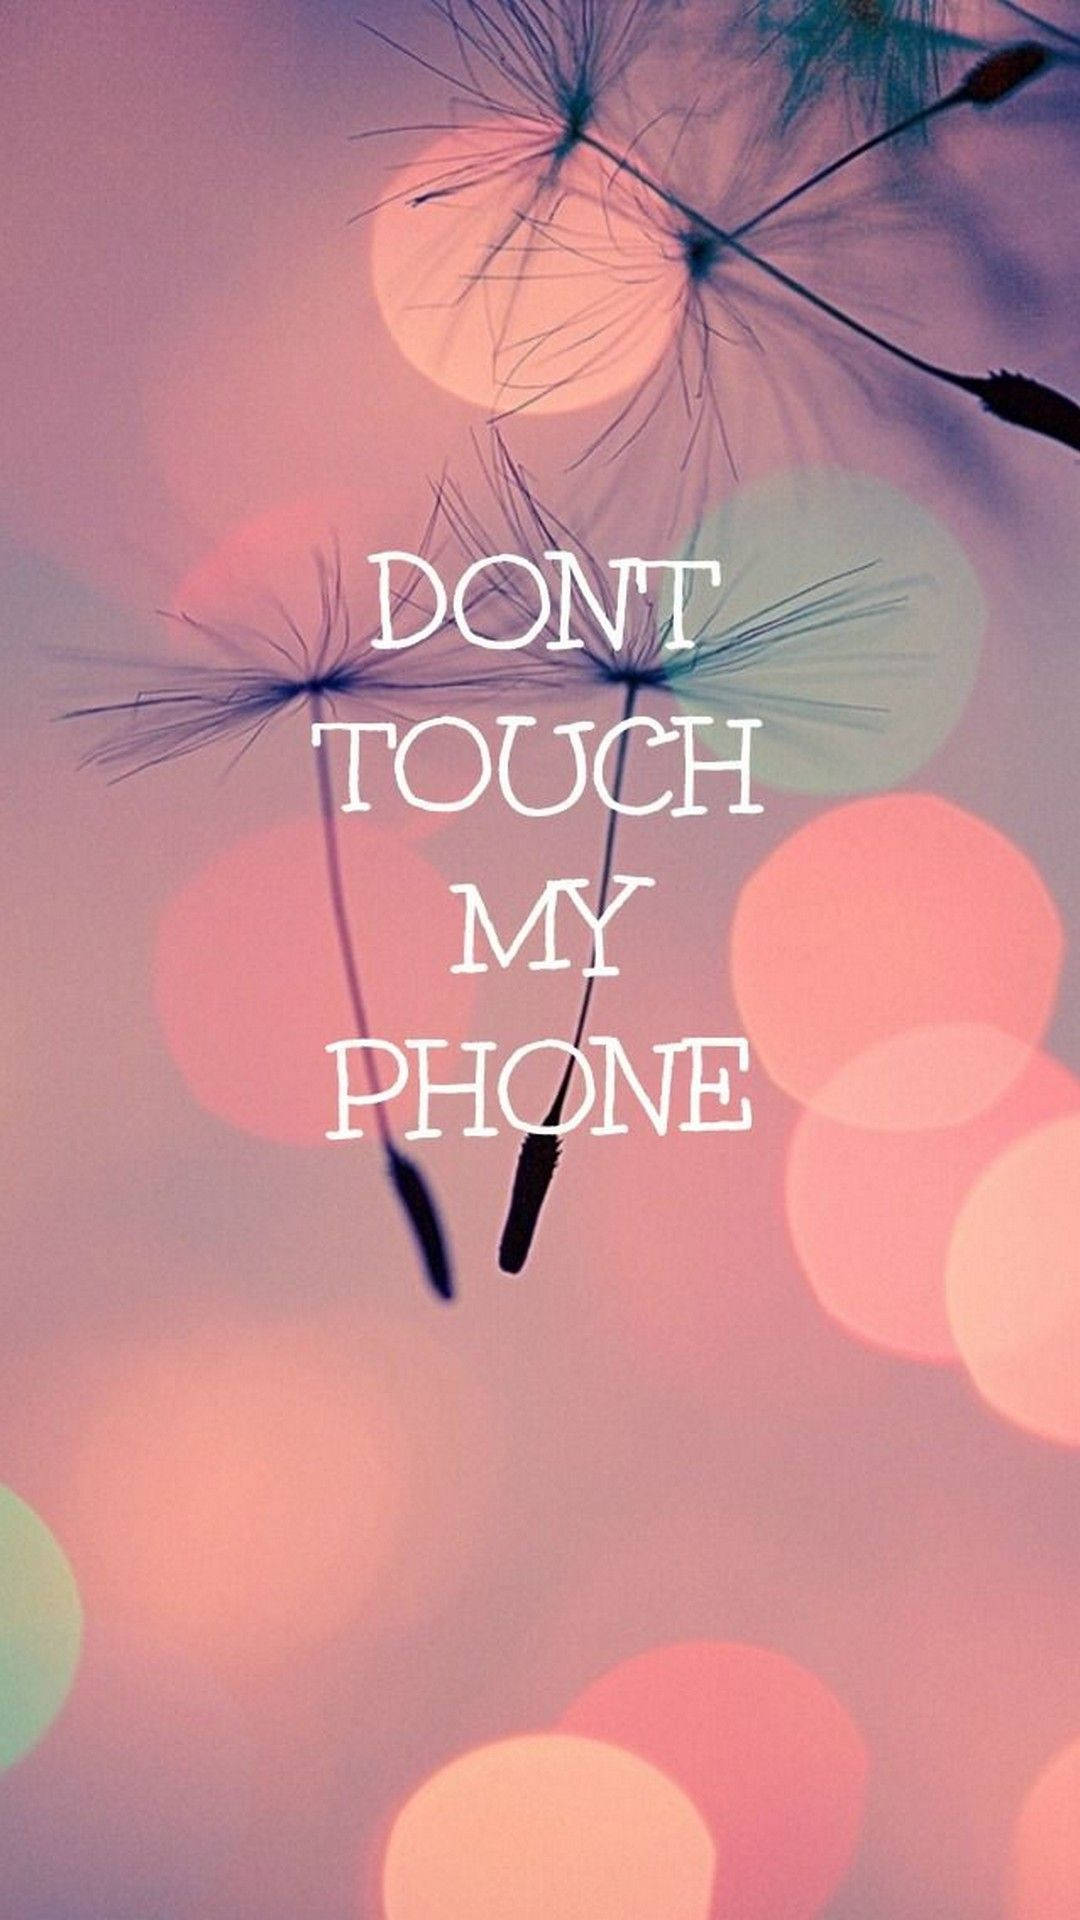 Download 1080x1920 Cute Girly Wallpaper Dont Touch My Phone Wallpaper |  